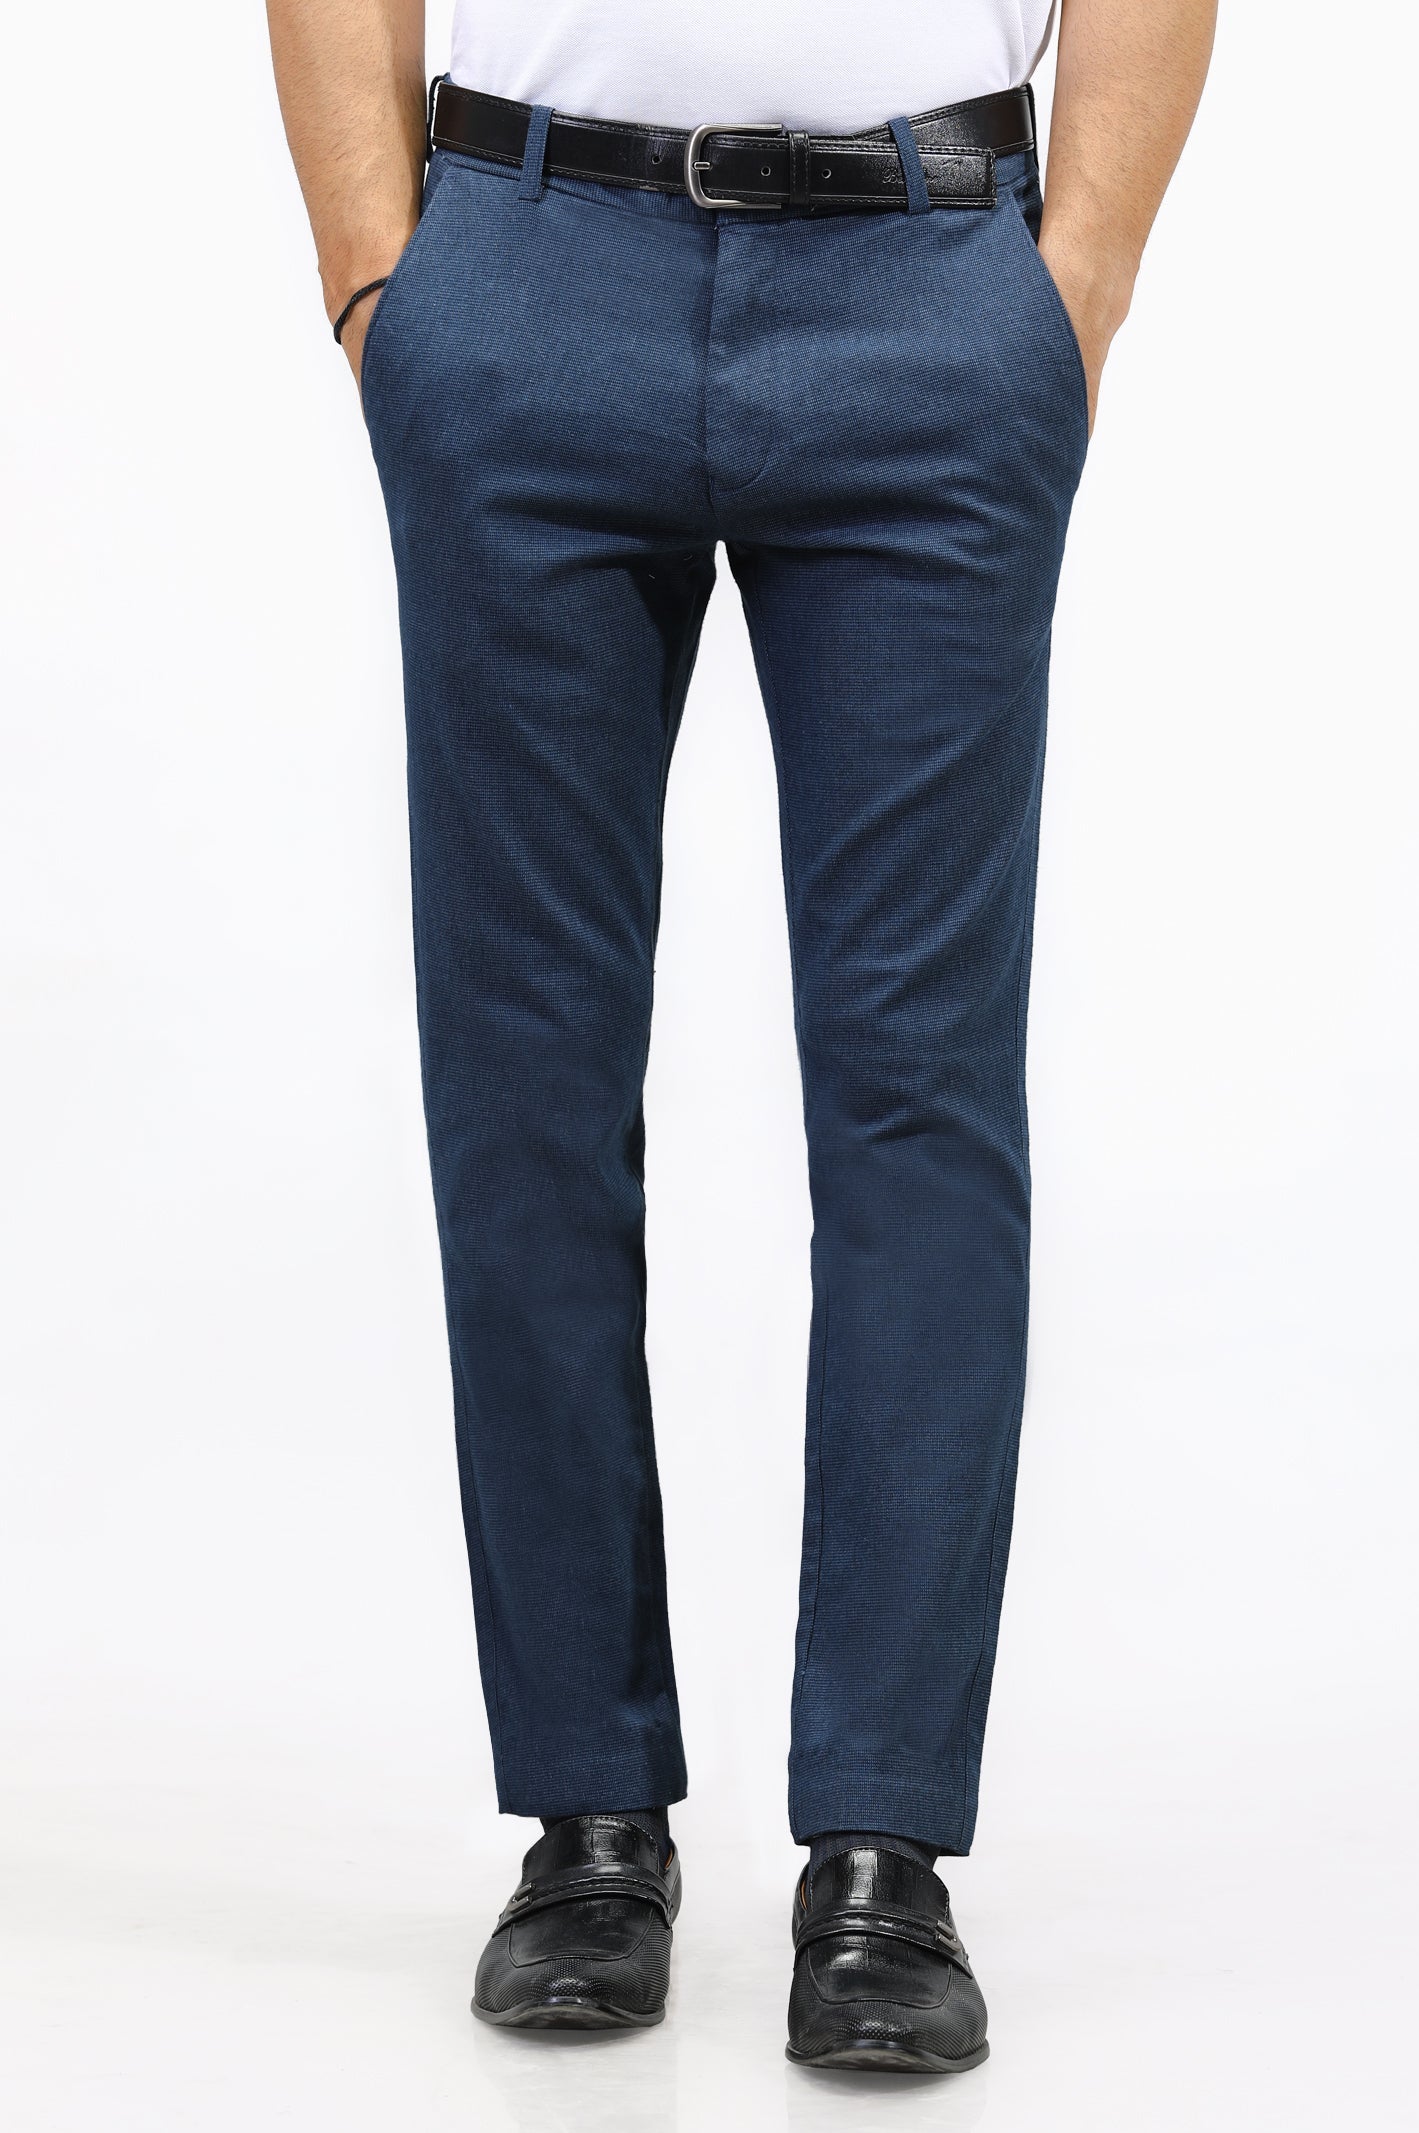 Navy Blue Formal Cotton Trouser From Diners